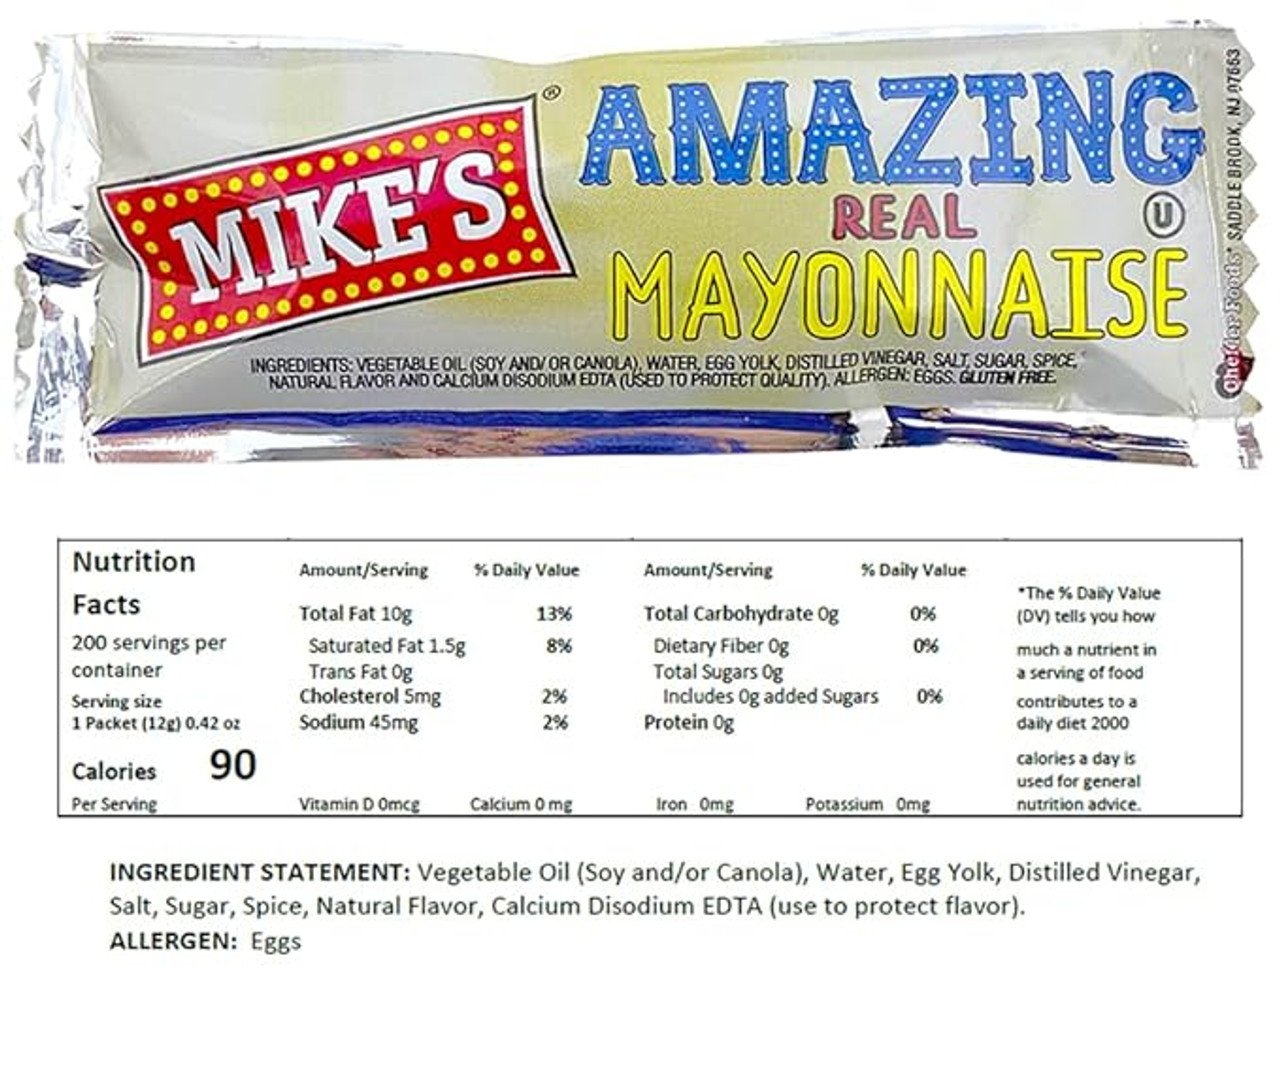 Mike's Amazing Real Mayonnaise Packets - 12g, 200/Case - Rich, Egg-Forward Taste - Chicken Pieces